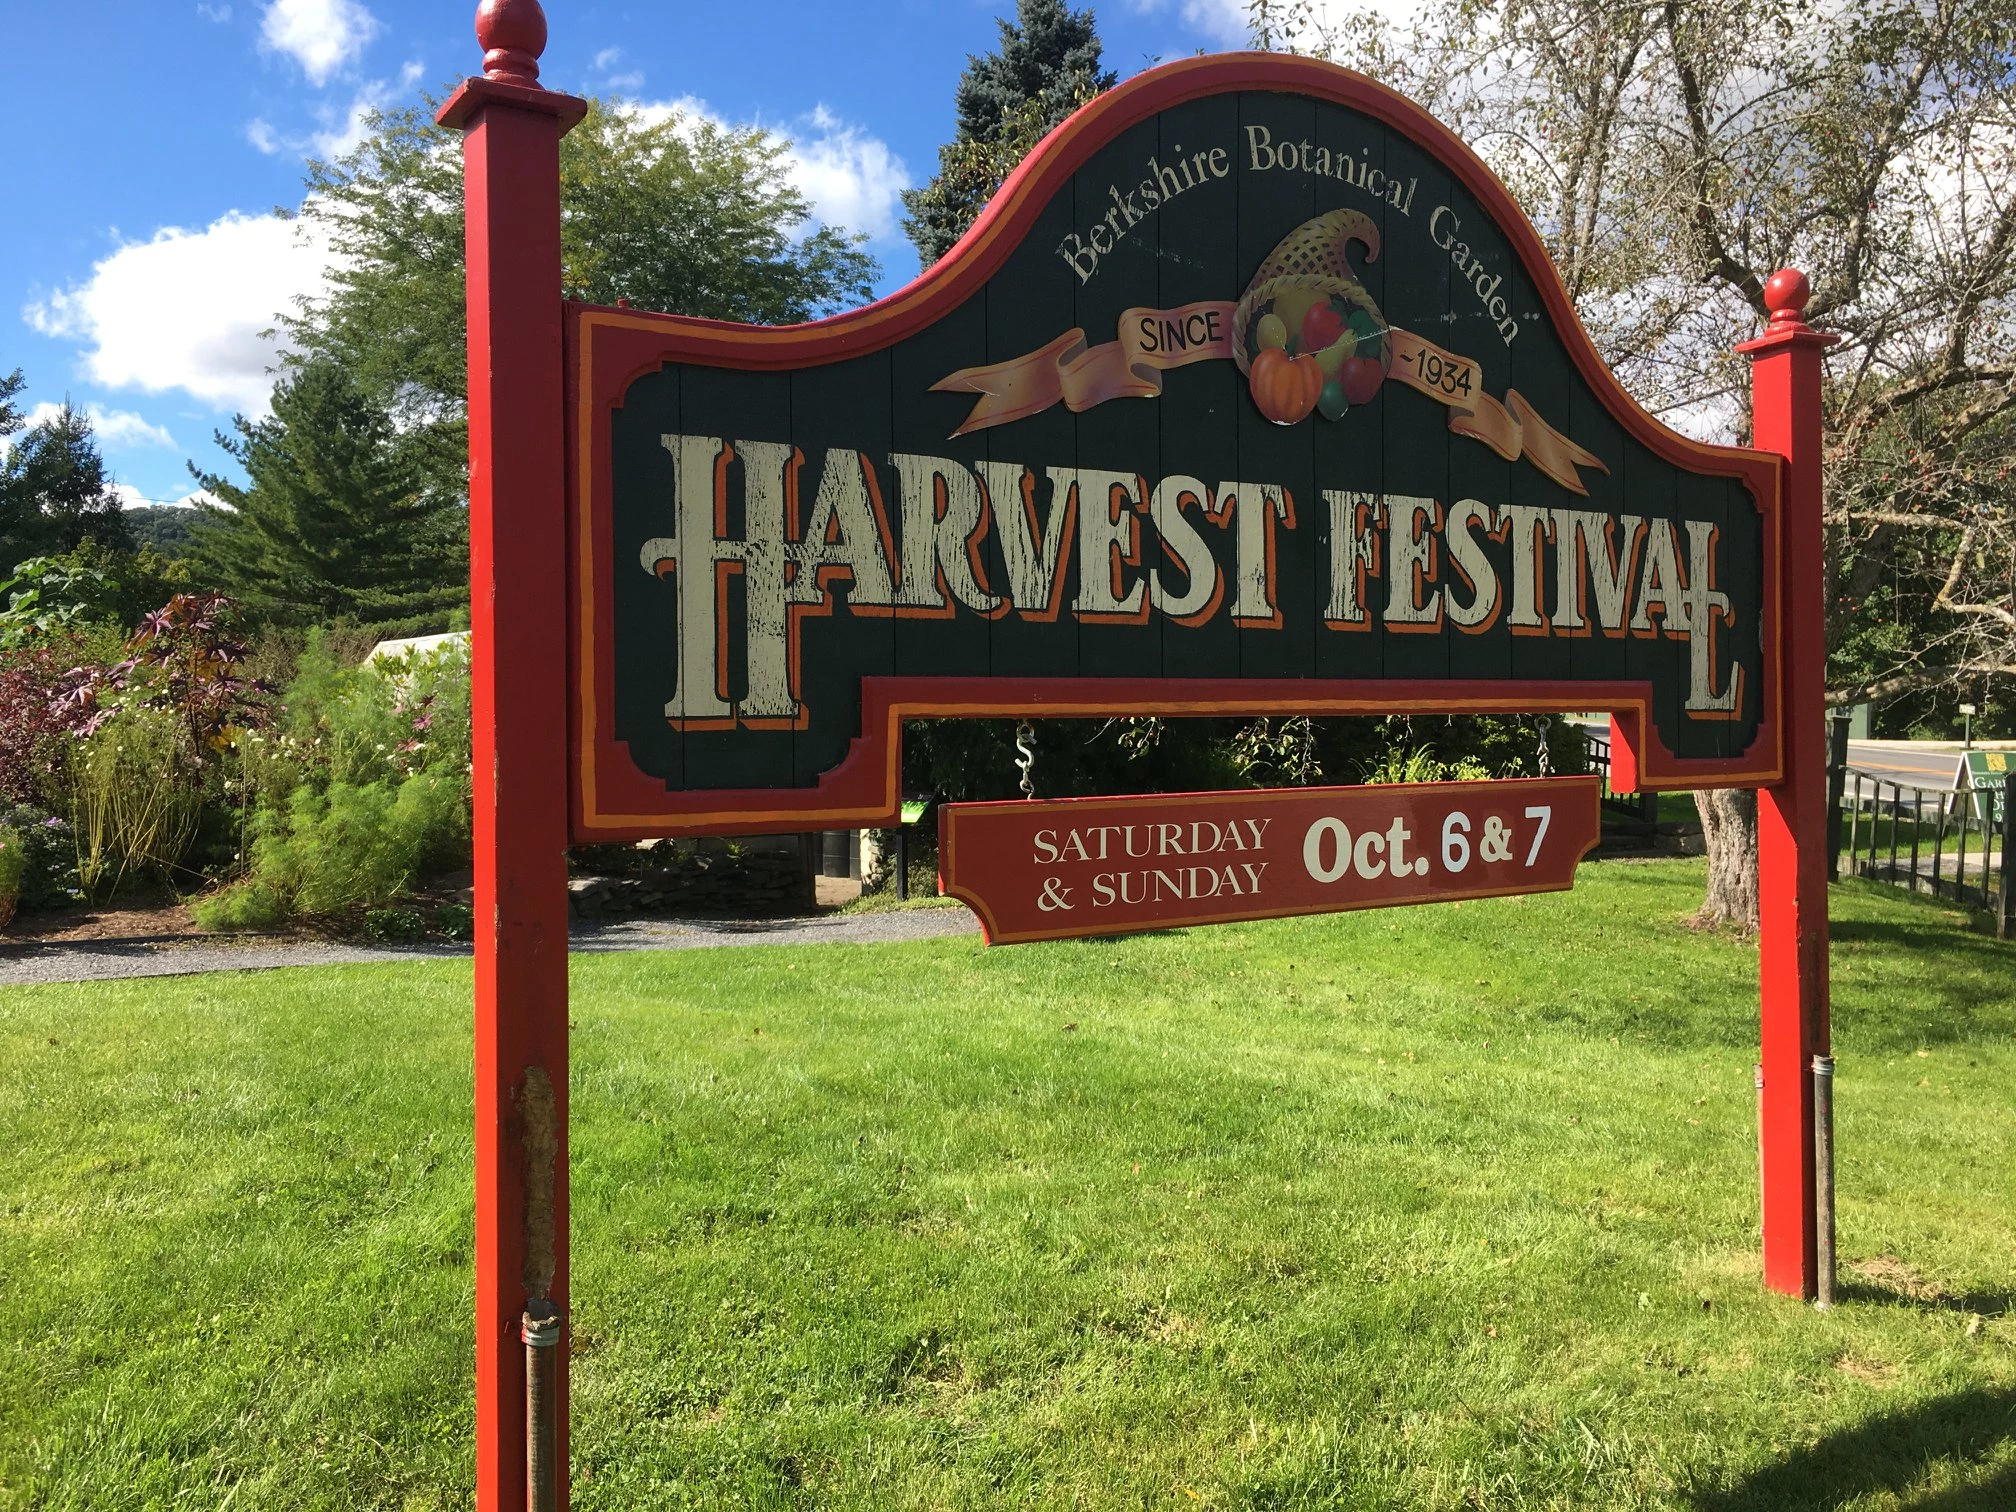 84th Annual Harvest Festival This Weekend